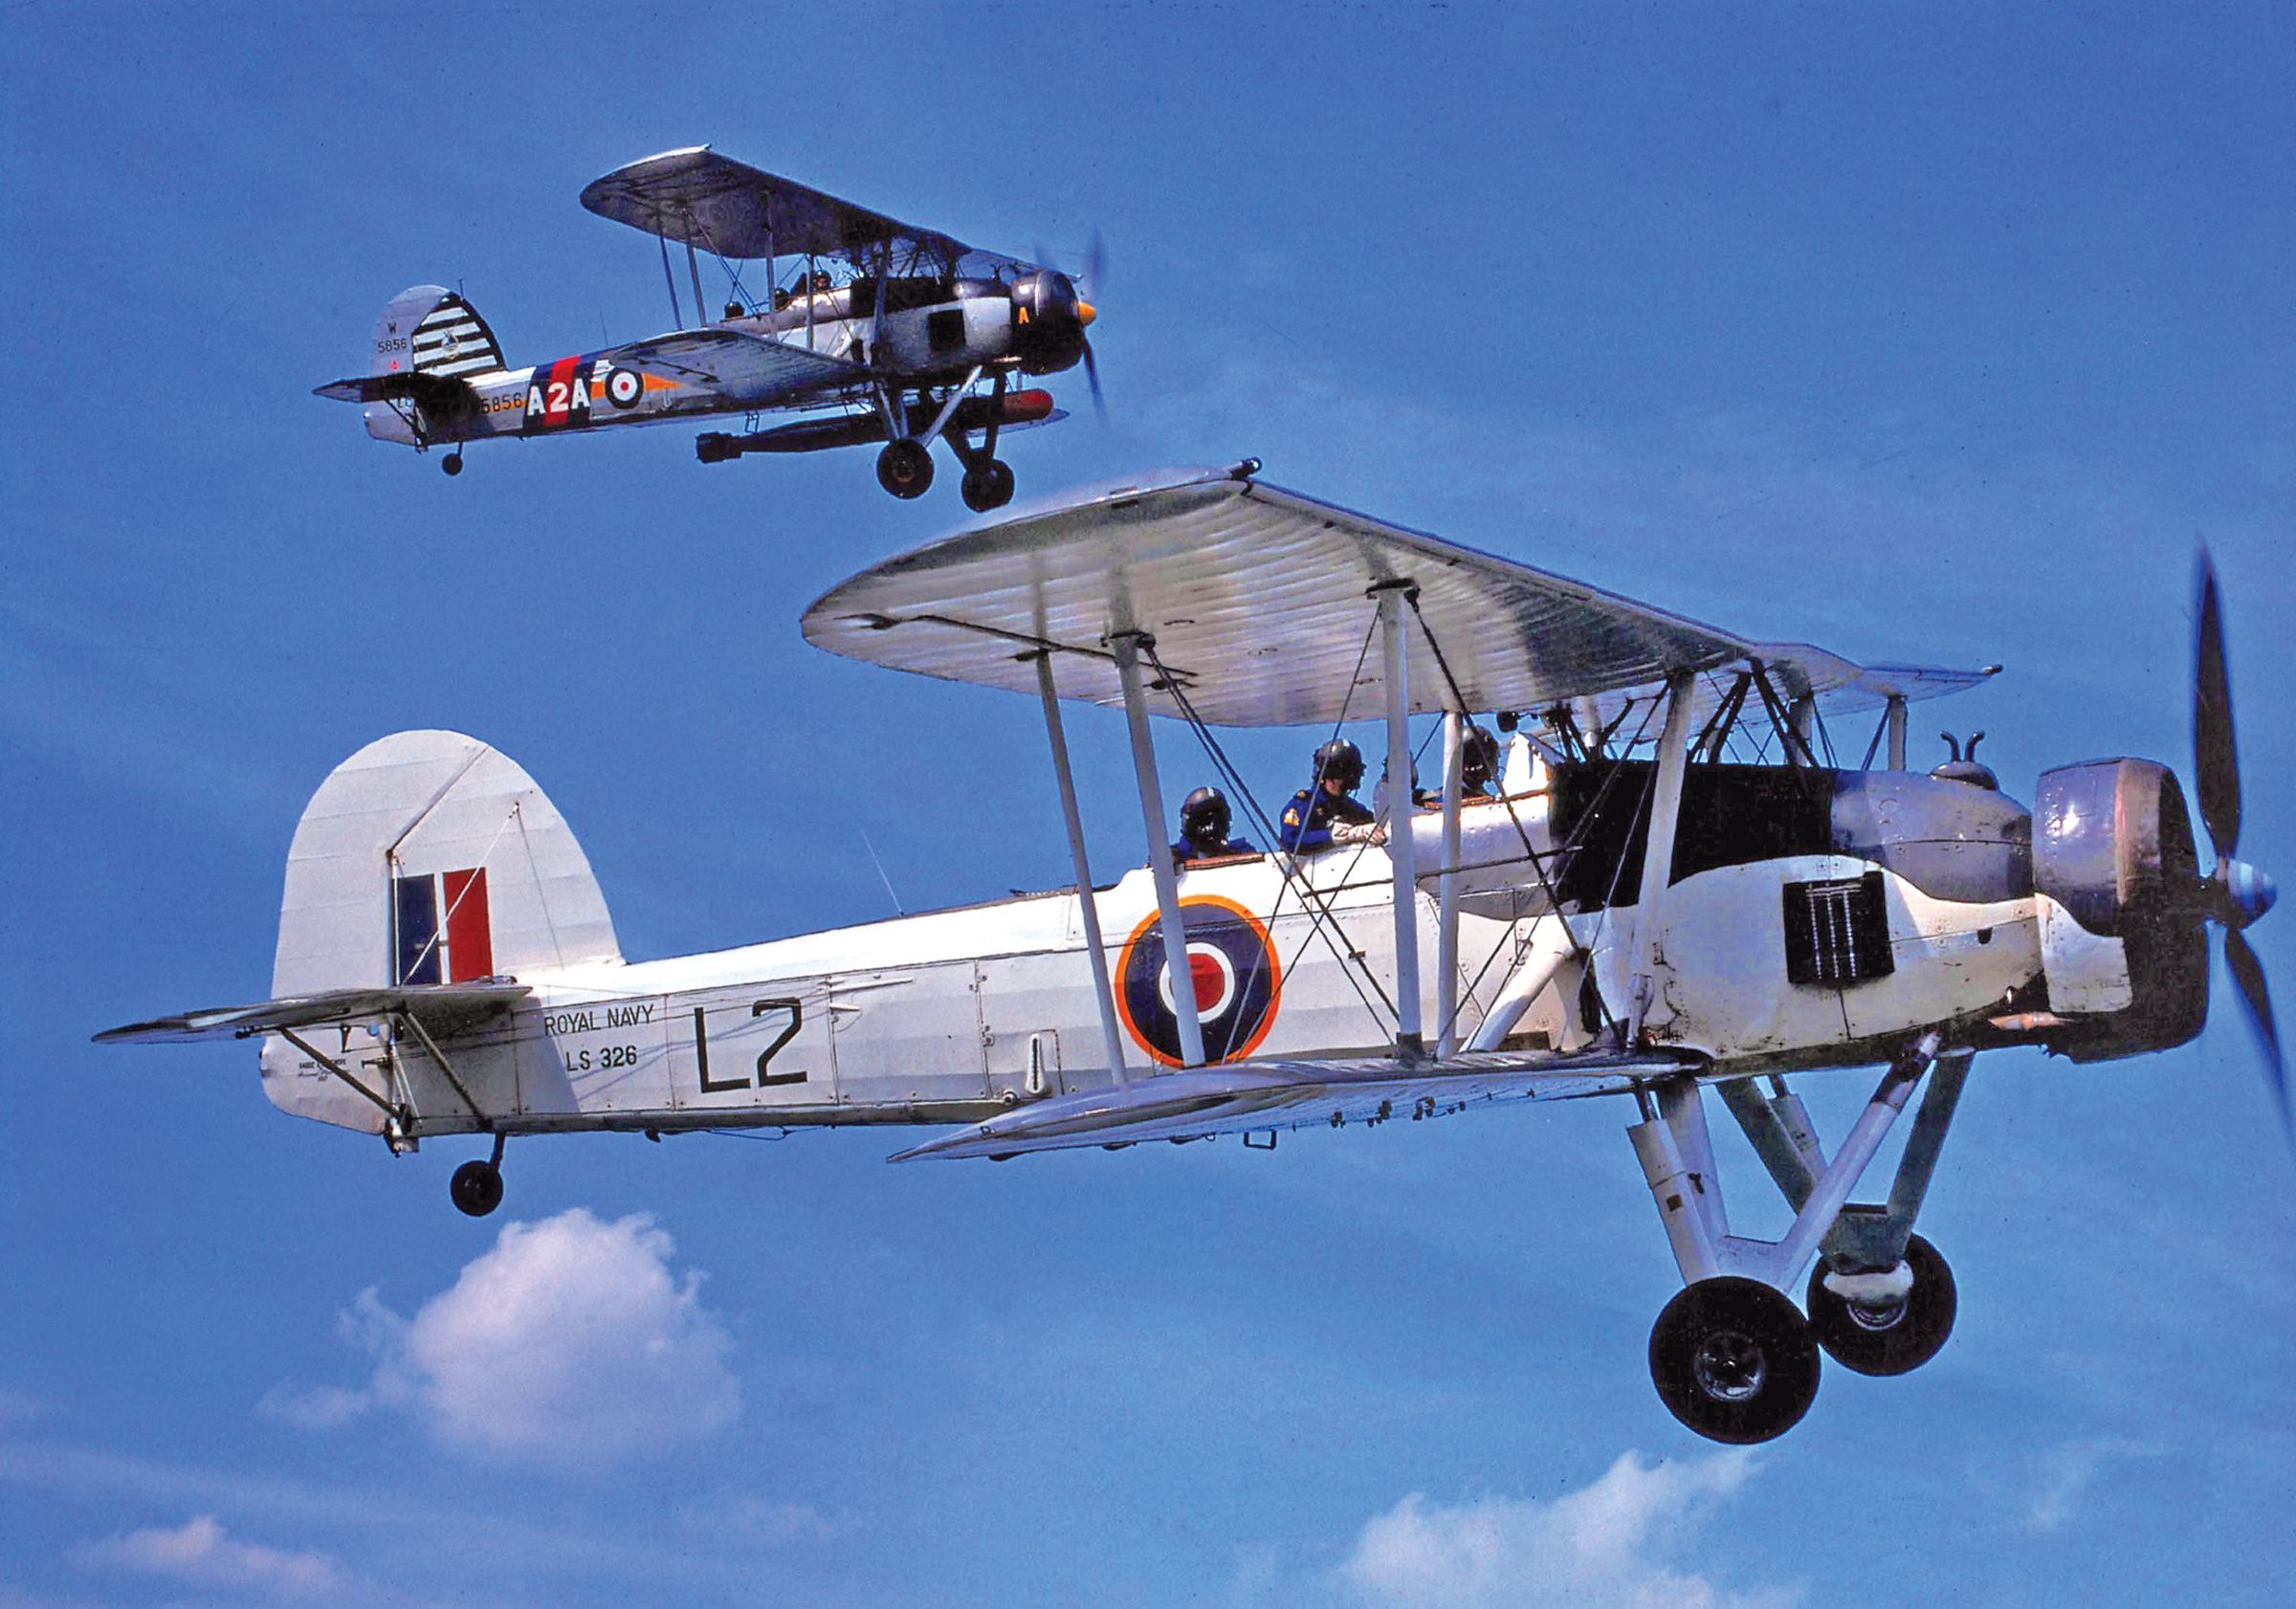 The Fairey Swordfish torpedo bomber was a flying anachronism by 1942, and today only two examples of the biplane survive, Mk II LS326 and Mk I W5856. These examples were given to the Royal Navy by Westland Aircraft Ltd. as a memorial to the men who served with the Royal Navy’s air service and the Fleet Air Arm from the inception of naval flight in 1909. During the 1960s, the Admiralty authorized the retention and preservation of historic aircraft capable of flight.